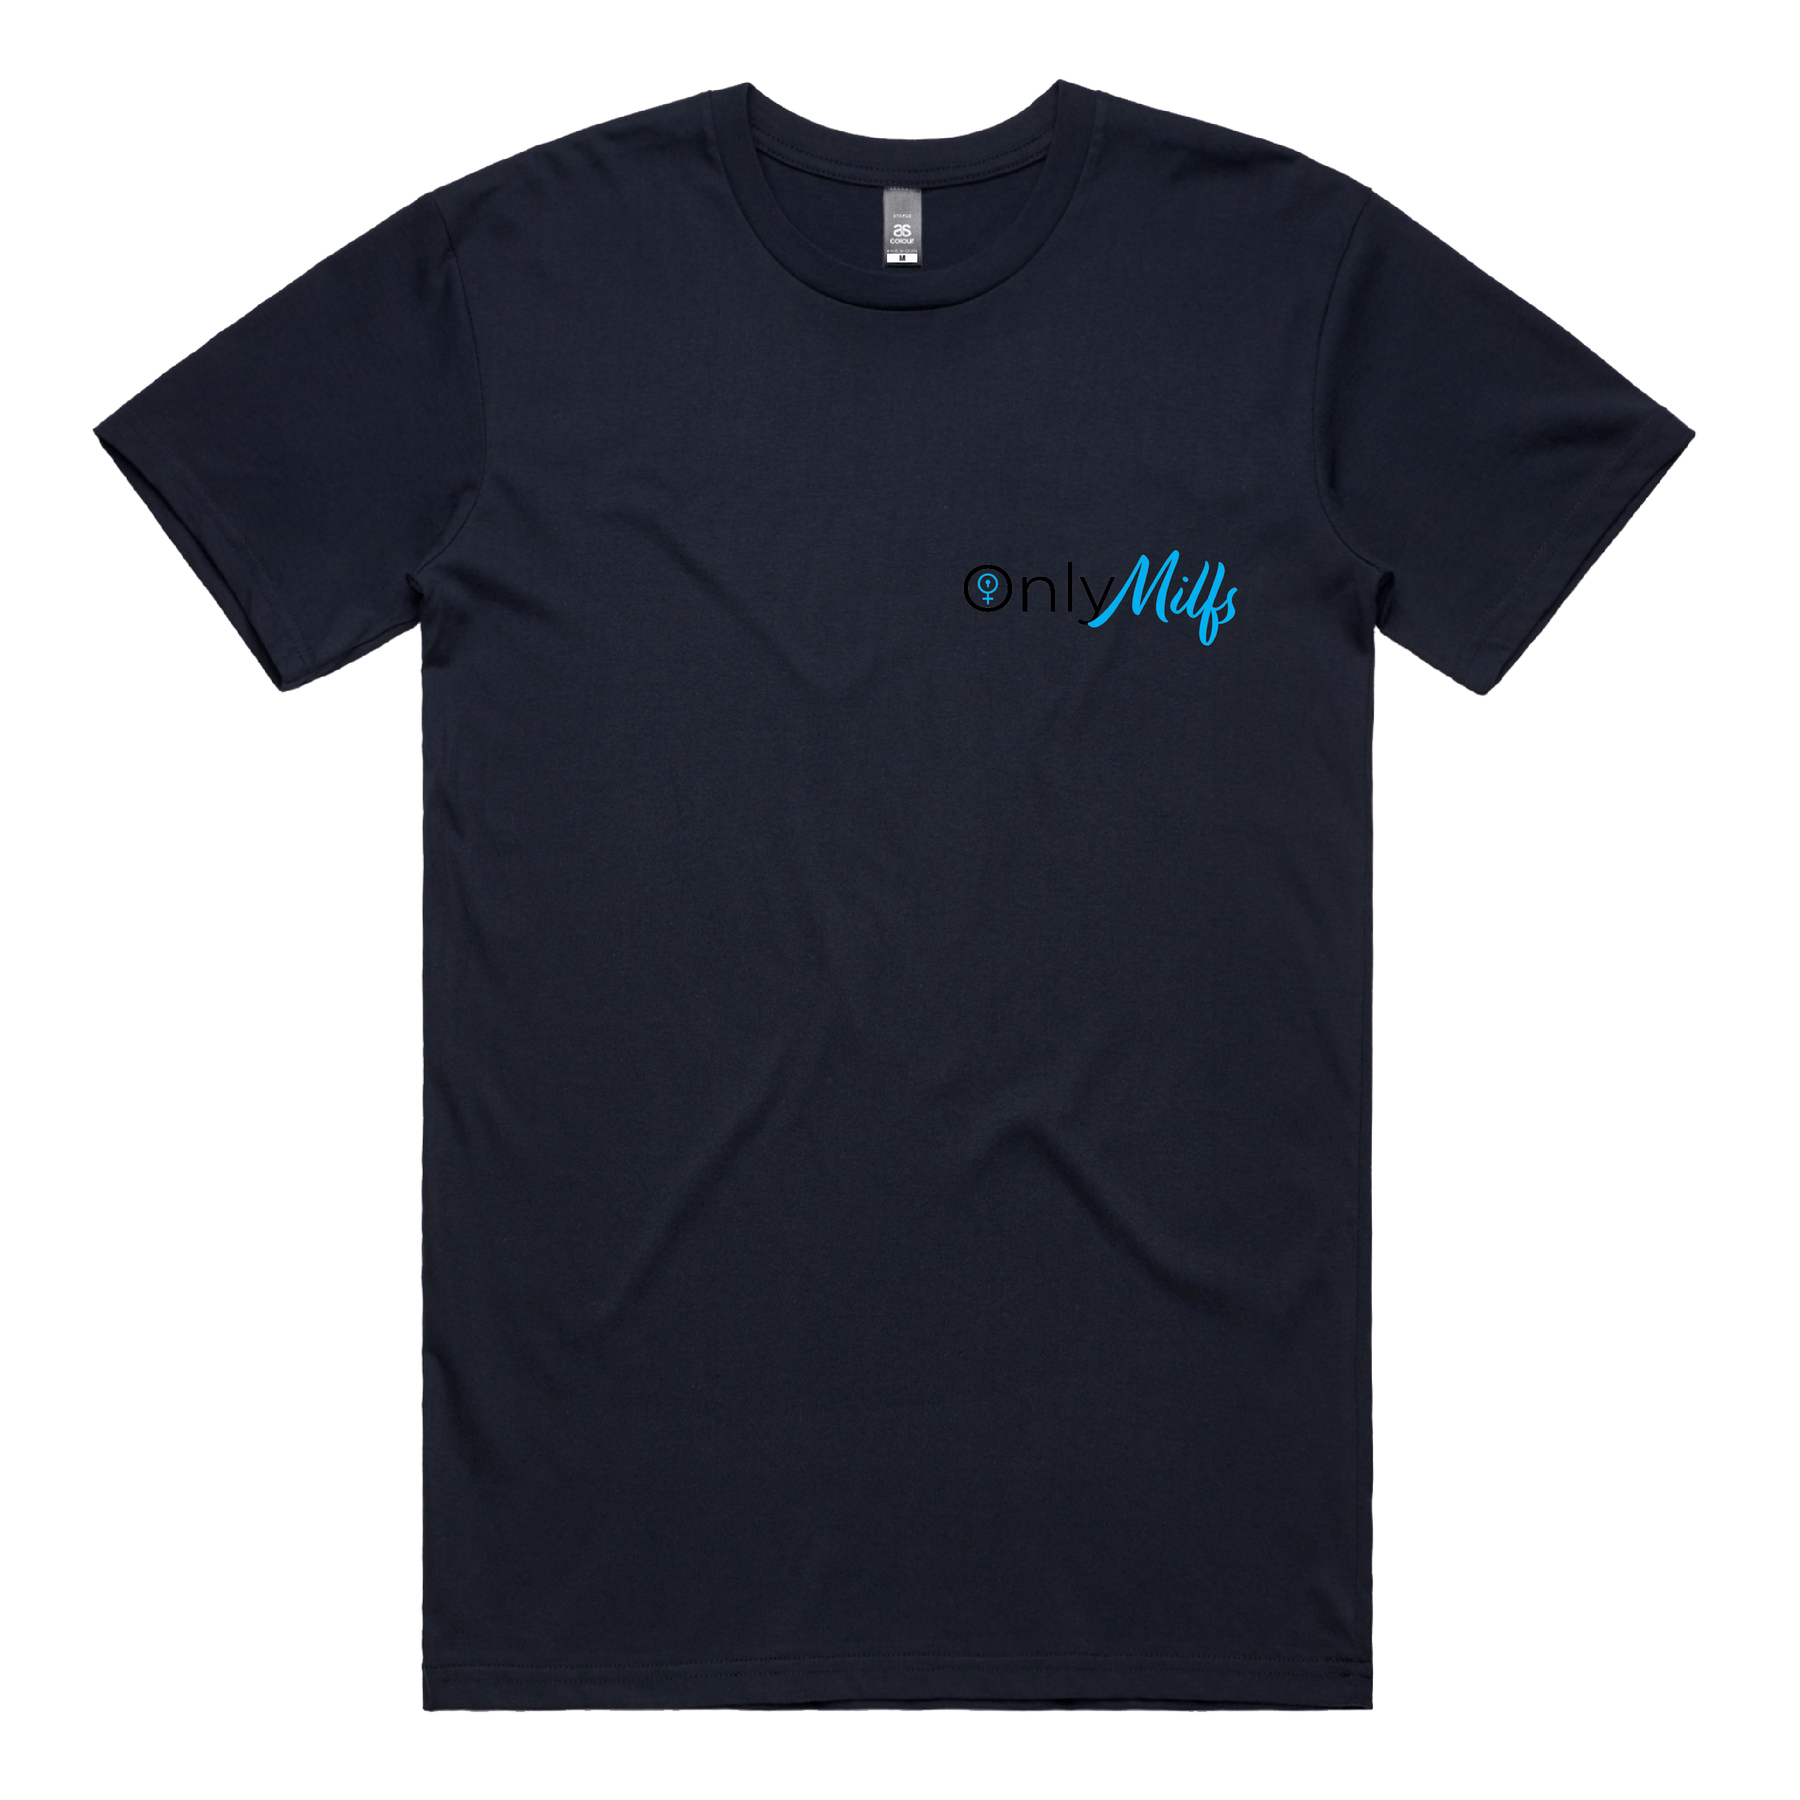 S / Navy / Small Front Design Only Milfs 👩‍👧‍👦👀 - Men's T Shirt